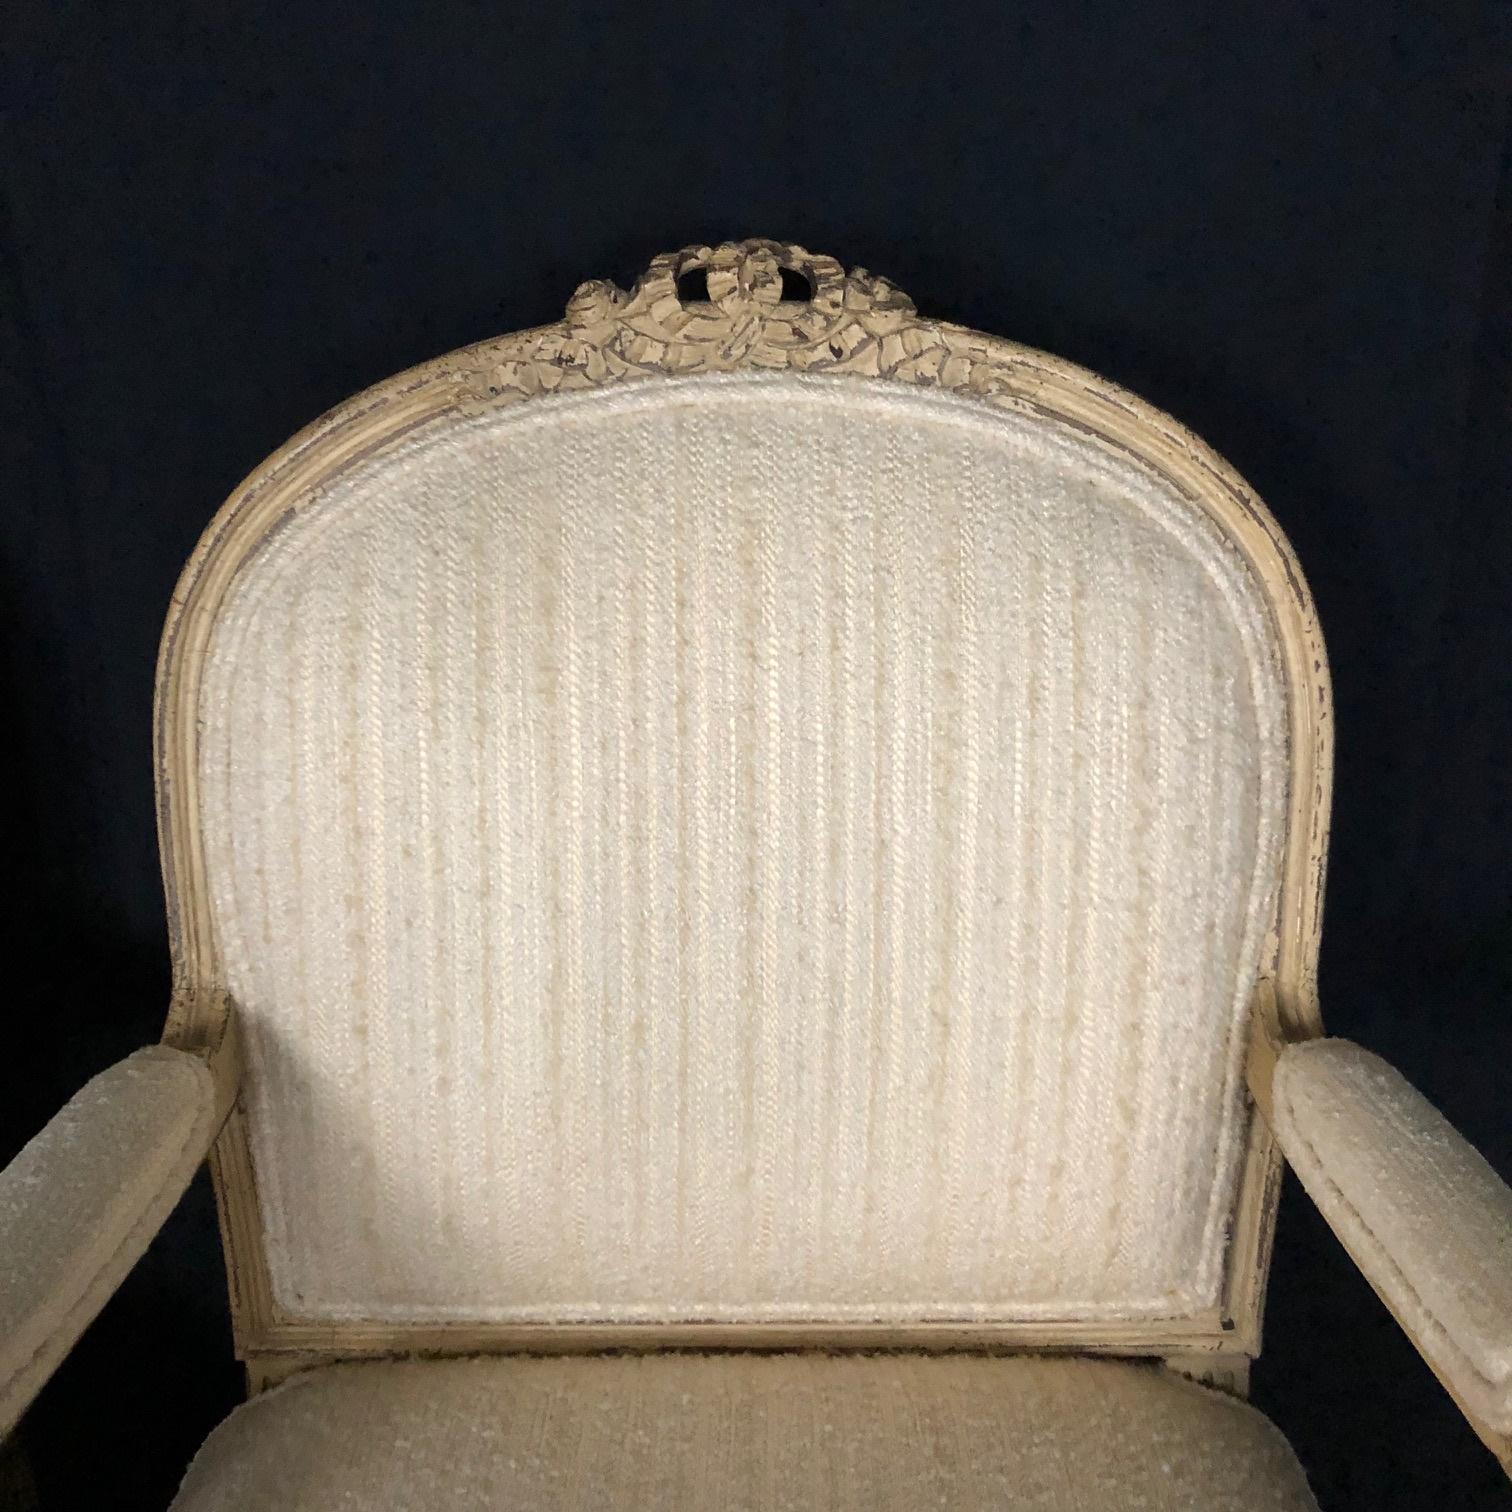 Pair of exquisite painted French bergère armchairs with ivory and cream paint and complementary upholstery, circa 1940s. Measure: Arm height 25.5
#5248.